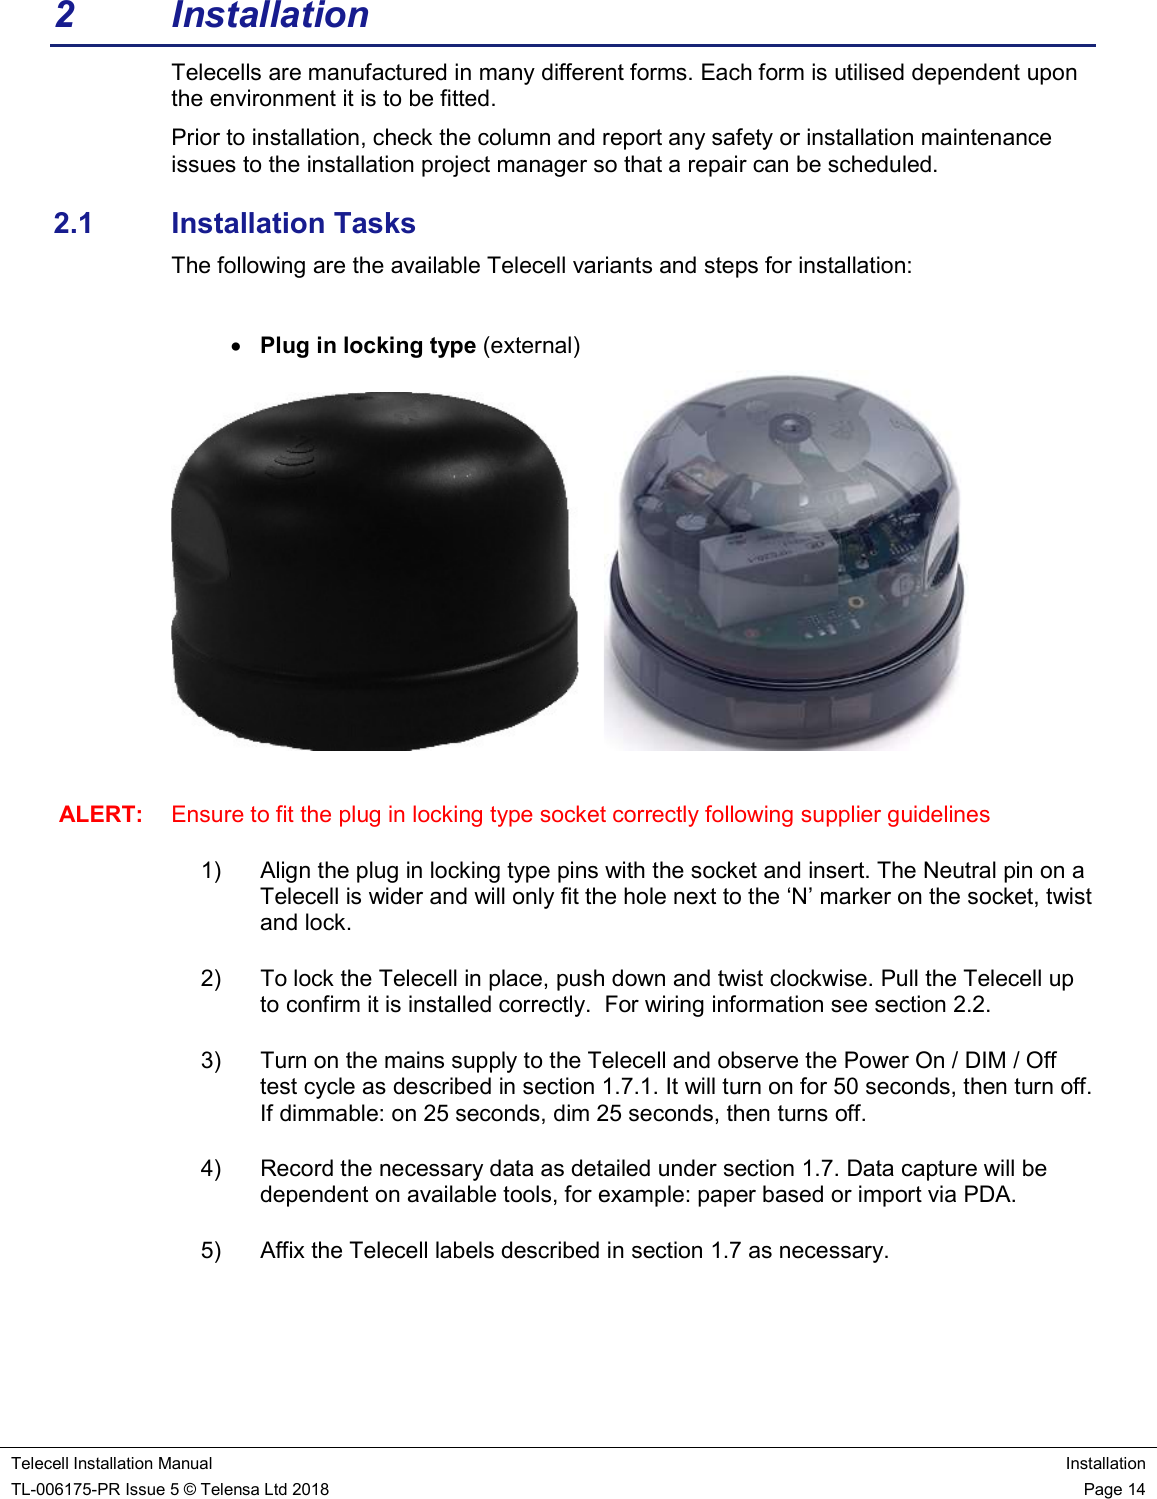    Telecell Installation Manual Installation TL-006175-PR Issue 5 © Telensa Ltd 2018    Page 14  2  Installation Telecells are manufactured in many different forms. Each form is utilised dependent upon the environment it is to be fitted. Prior to installation, check the column and report any safety or installation maintenance issues to the installation project manager so that a repair can be scheduled. 2.1  Installation Tasks The following are the available Telecell variants and steps for installation:   Plug in locking type (external)        ALERT:  Ensure to fit the plug in locking type socket correctly following supplier guidelines 1)  Align the plug in locking type pins with the socket and insert. The Neutral pin on a Telecell is wider and will only fit the hole next to the ‘N’ marker on the socket, twist and lock.  2)  To lock the Telecell in place, push down and twist clockwise. Pull the Telecell up to confirm it is installed correctly.  For wiring information see section 2.2.                                   3)  Turn on the mains supply to the Telecell and observe the Power On / DIM / Off test cycle as described in section 1.7.1. It will turn on for 50 seconds, then turn off. If dimmable: on 25 seconds, dim 25 seconds, then turns off. 4)  Record the necessary data as detailed under section 1.7. Data capture will be dependent on available tools, for example: paper based or import via PDA. 5)  Affix the Telecell labels described in section 1.7 as necessary.       